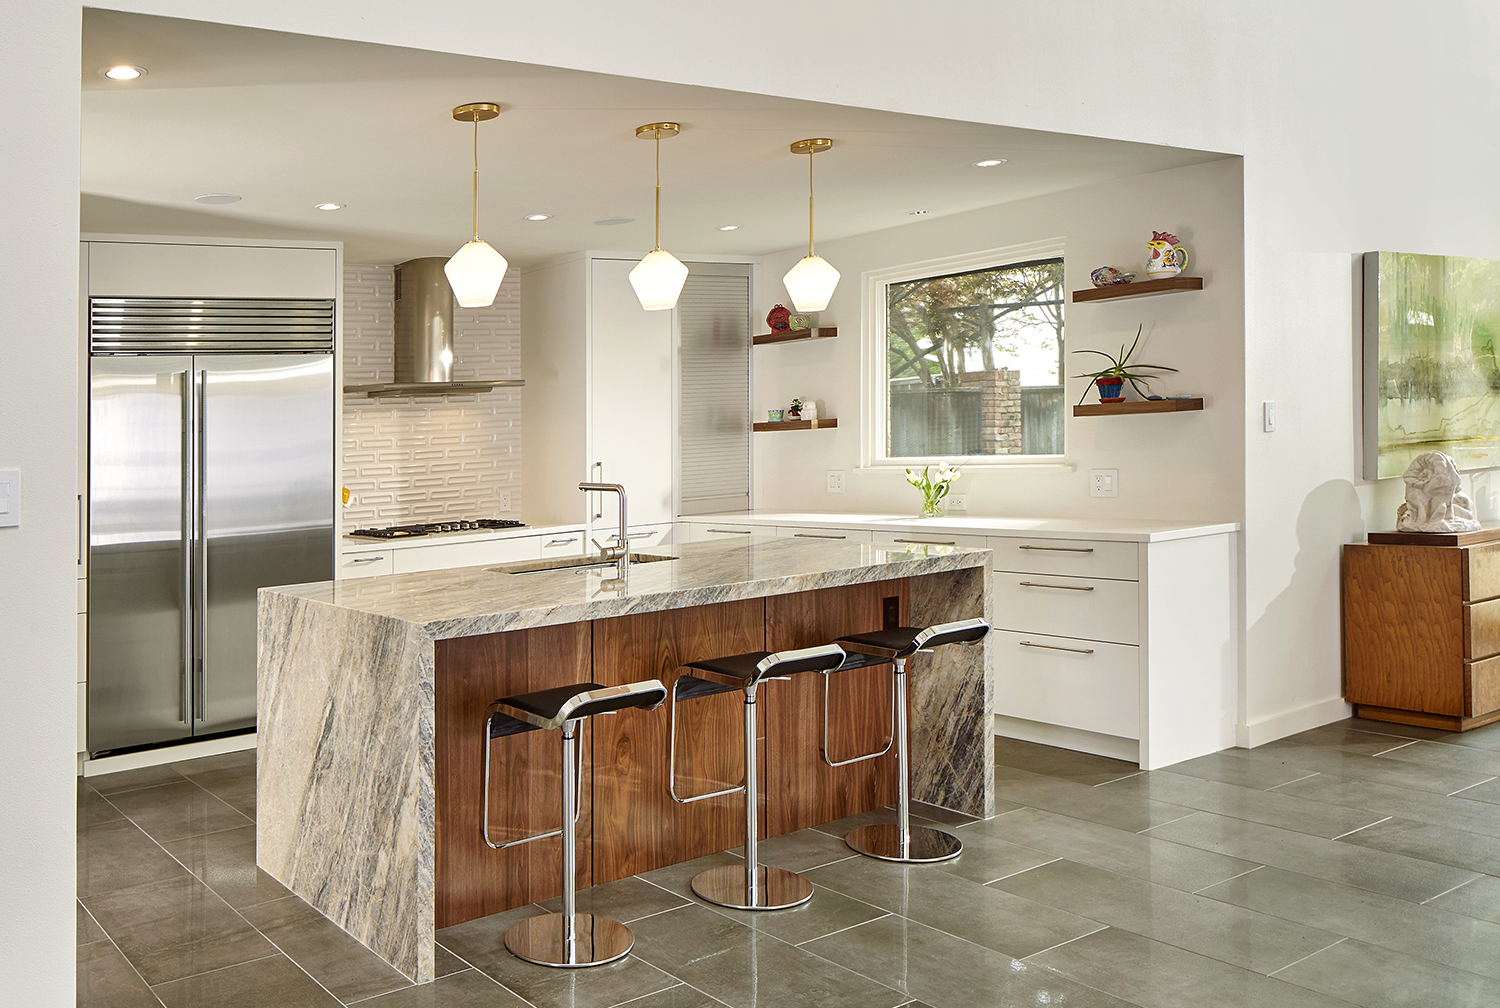 Maintaining Mid-Century Modern Vibes in Complete Remodel - Bentwood Luxury  Kitchens